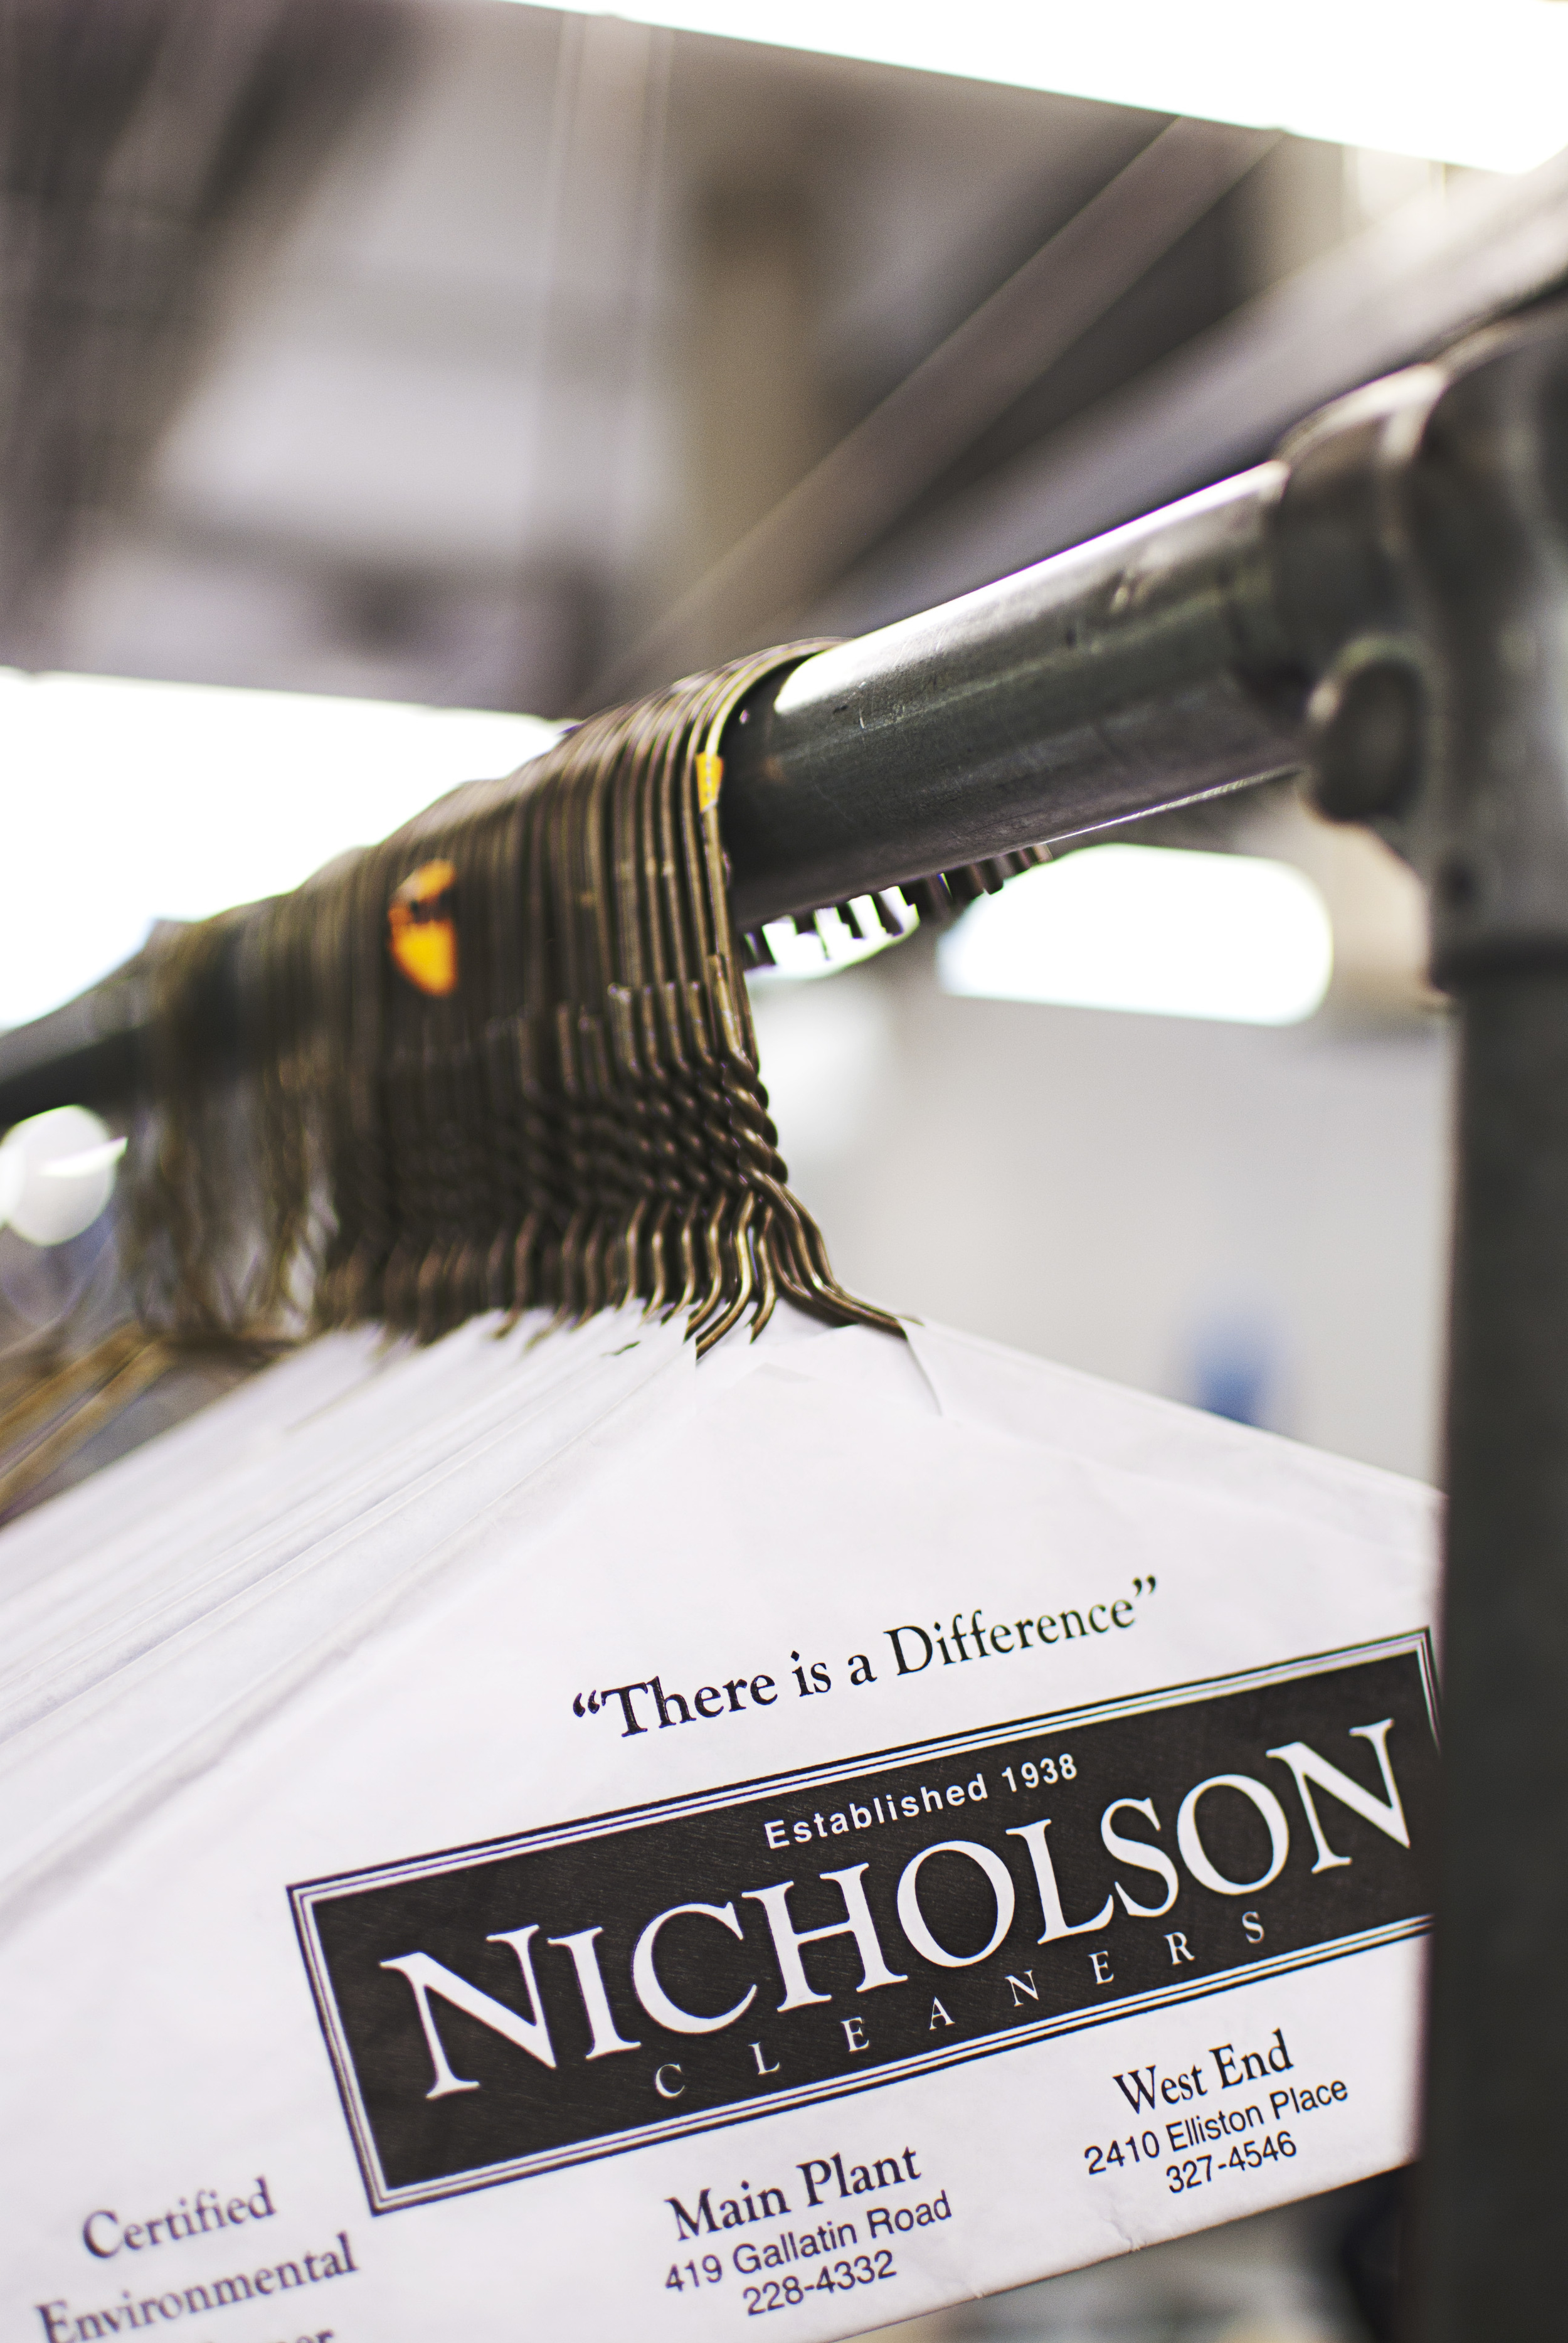 nicholsoncleaners-jeorgimages